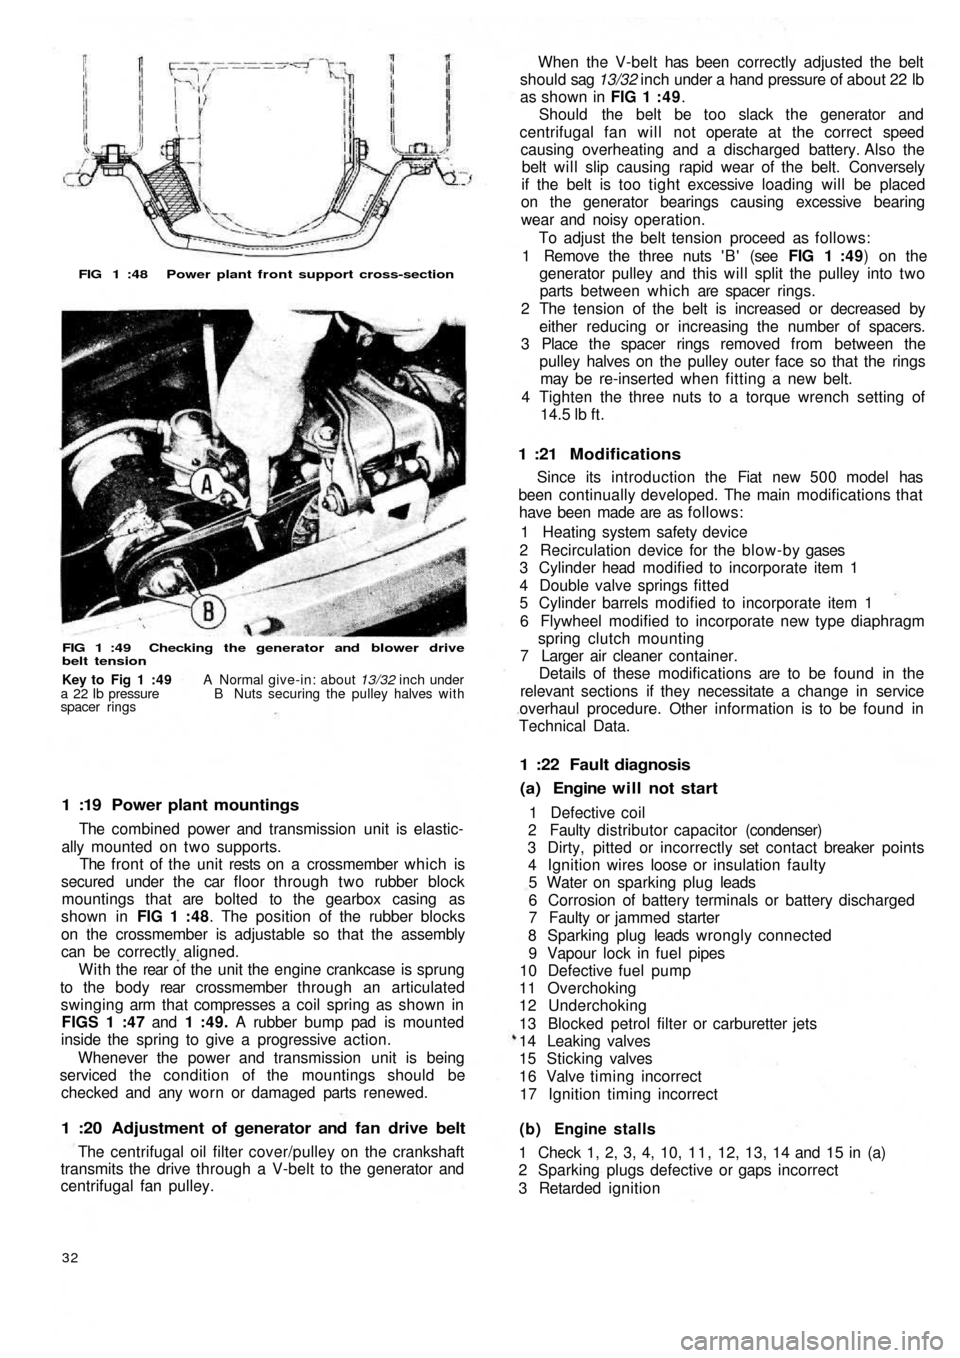 FIAT 500 1965 1.G Workshop Manual FIG 1 :48  Power plant front support cross-section
FIG 1 :49  Checking  the generator and  blower drive
belt tension
1 :19  Power plant mountings
The combined power and transmission unit is elastic-
a